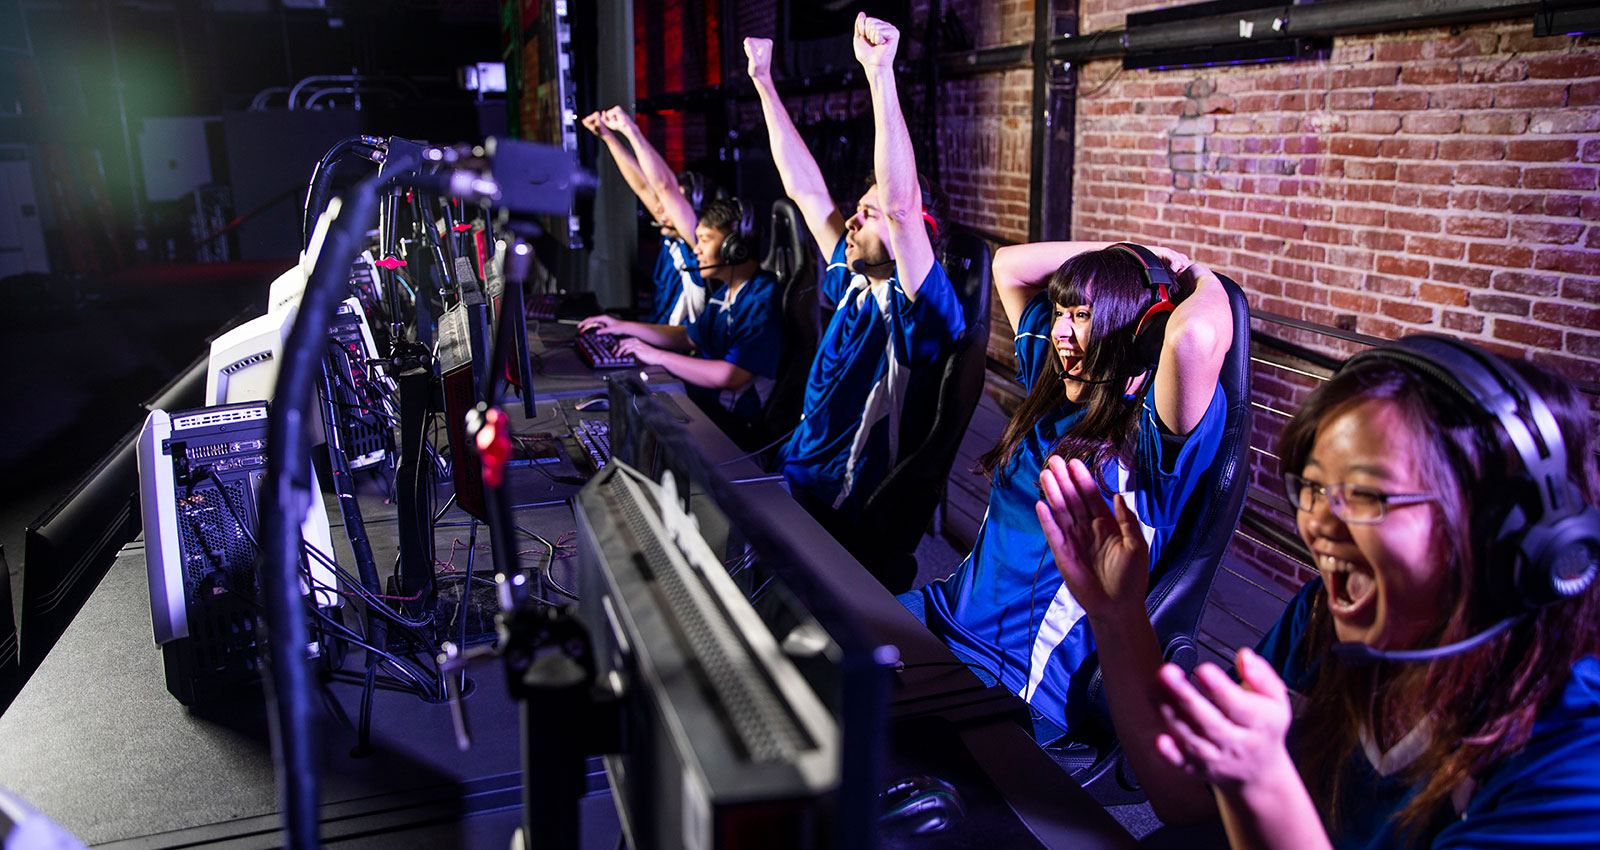 Esports provide new opportunities for CT students